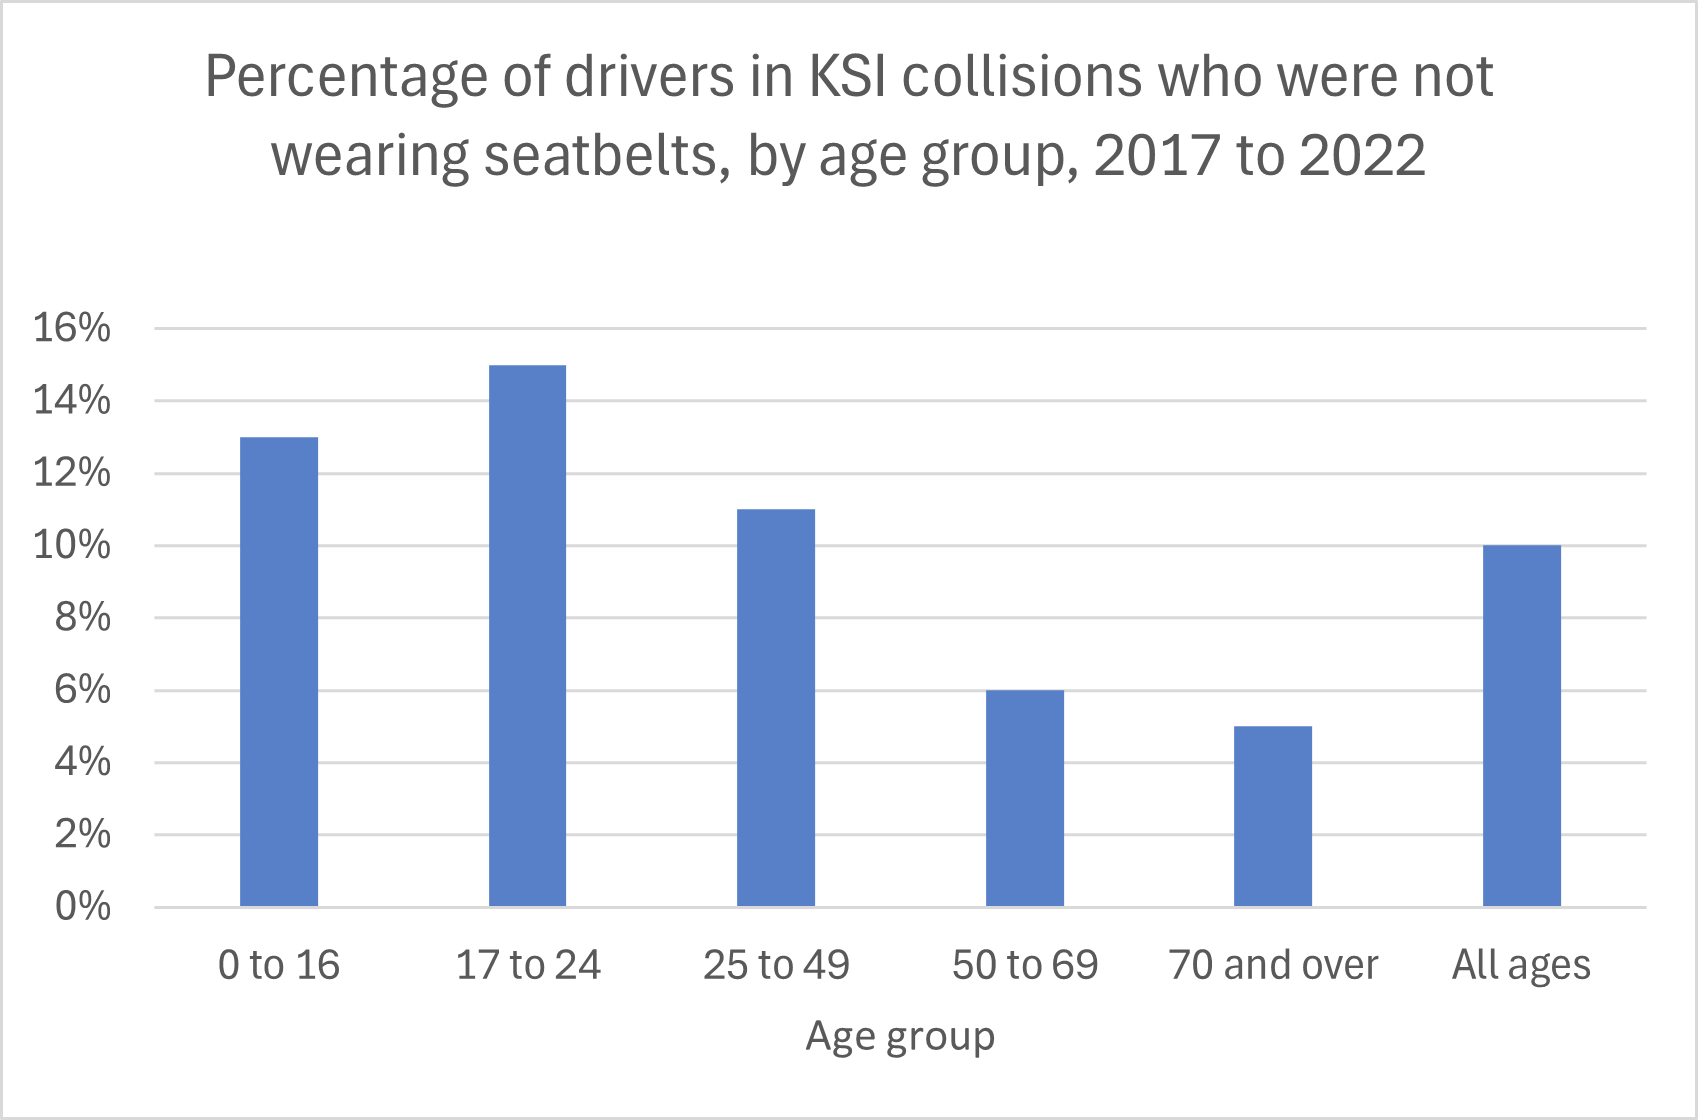 Seatbelt use - drivers in collisions by age